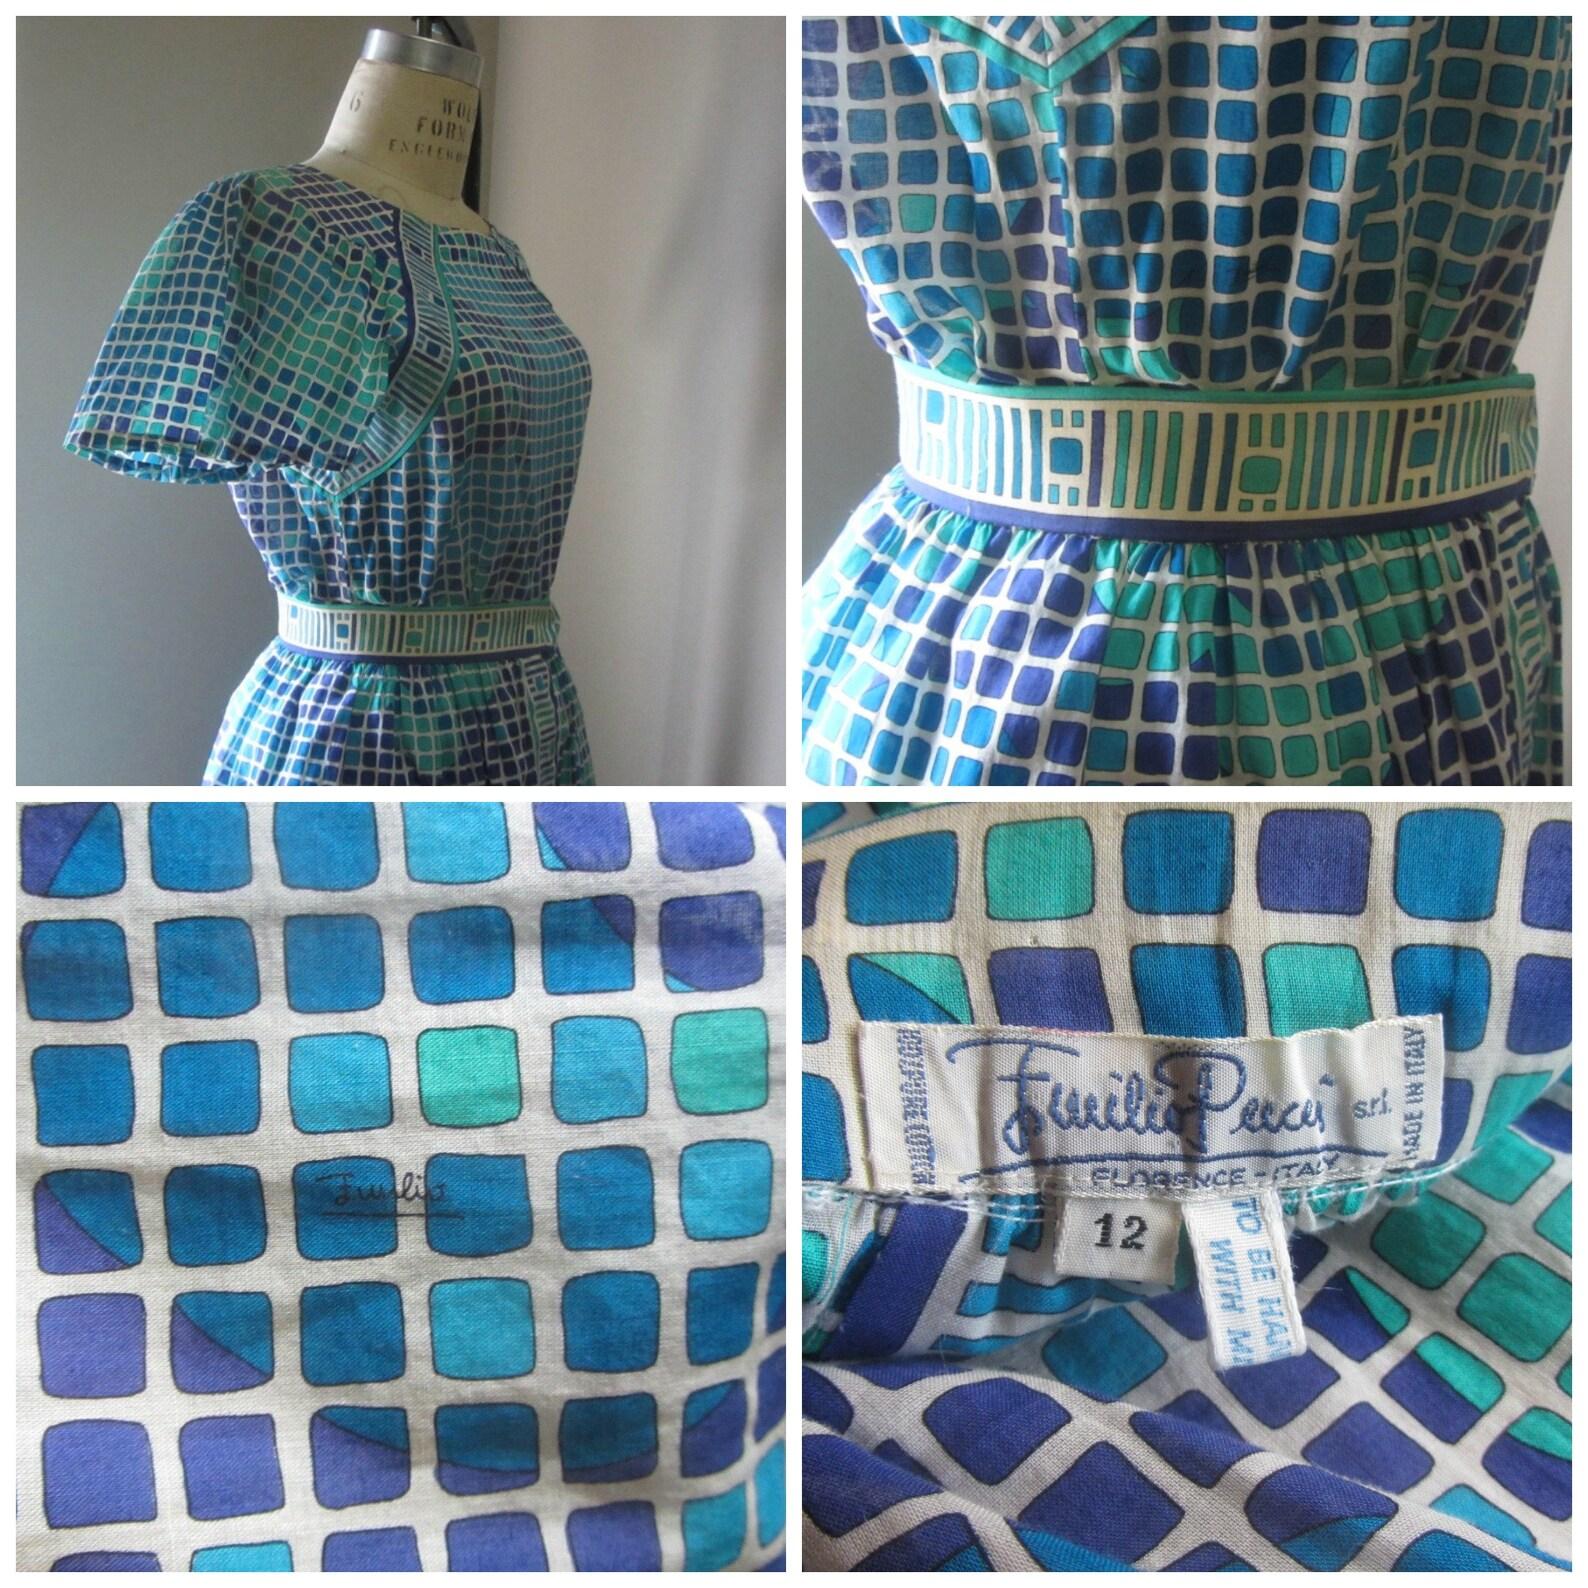 Emilio Pucci Cotton Geometric Print Top and Skirt Set, Circa 1960s For Sale 5